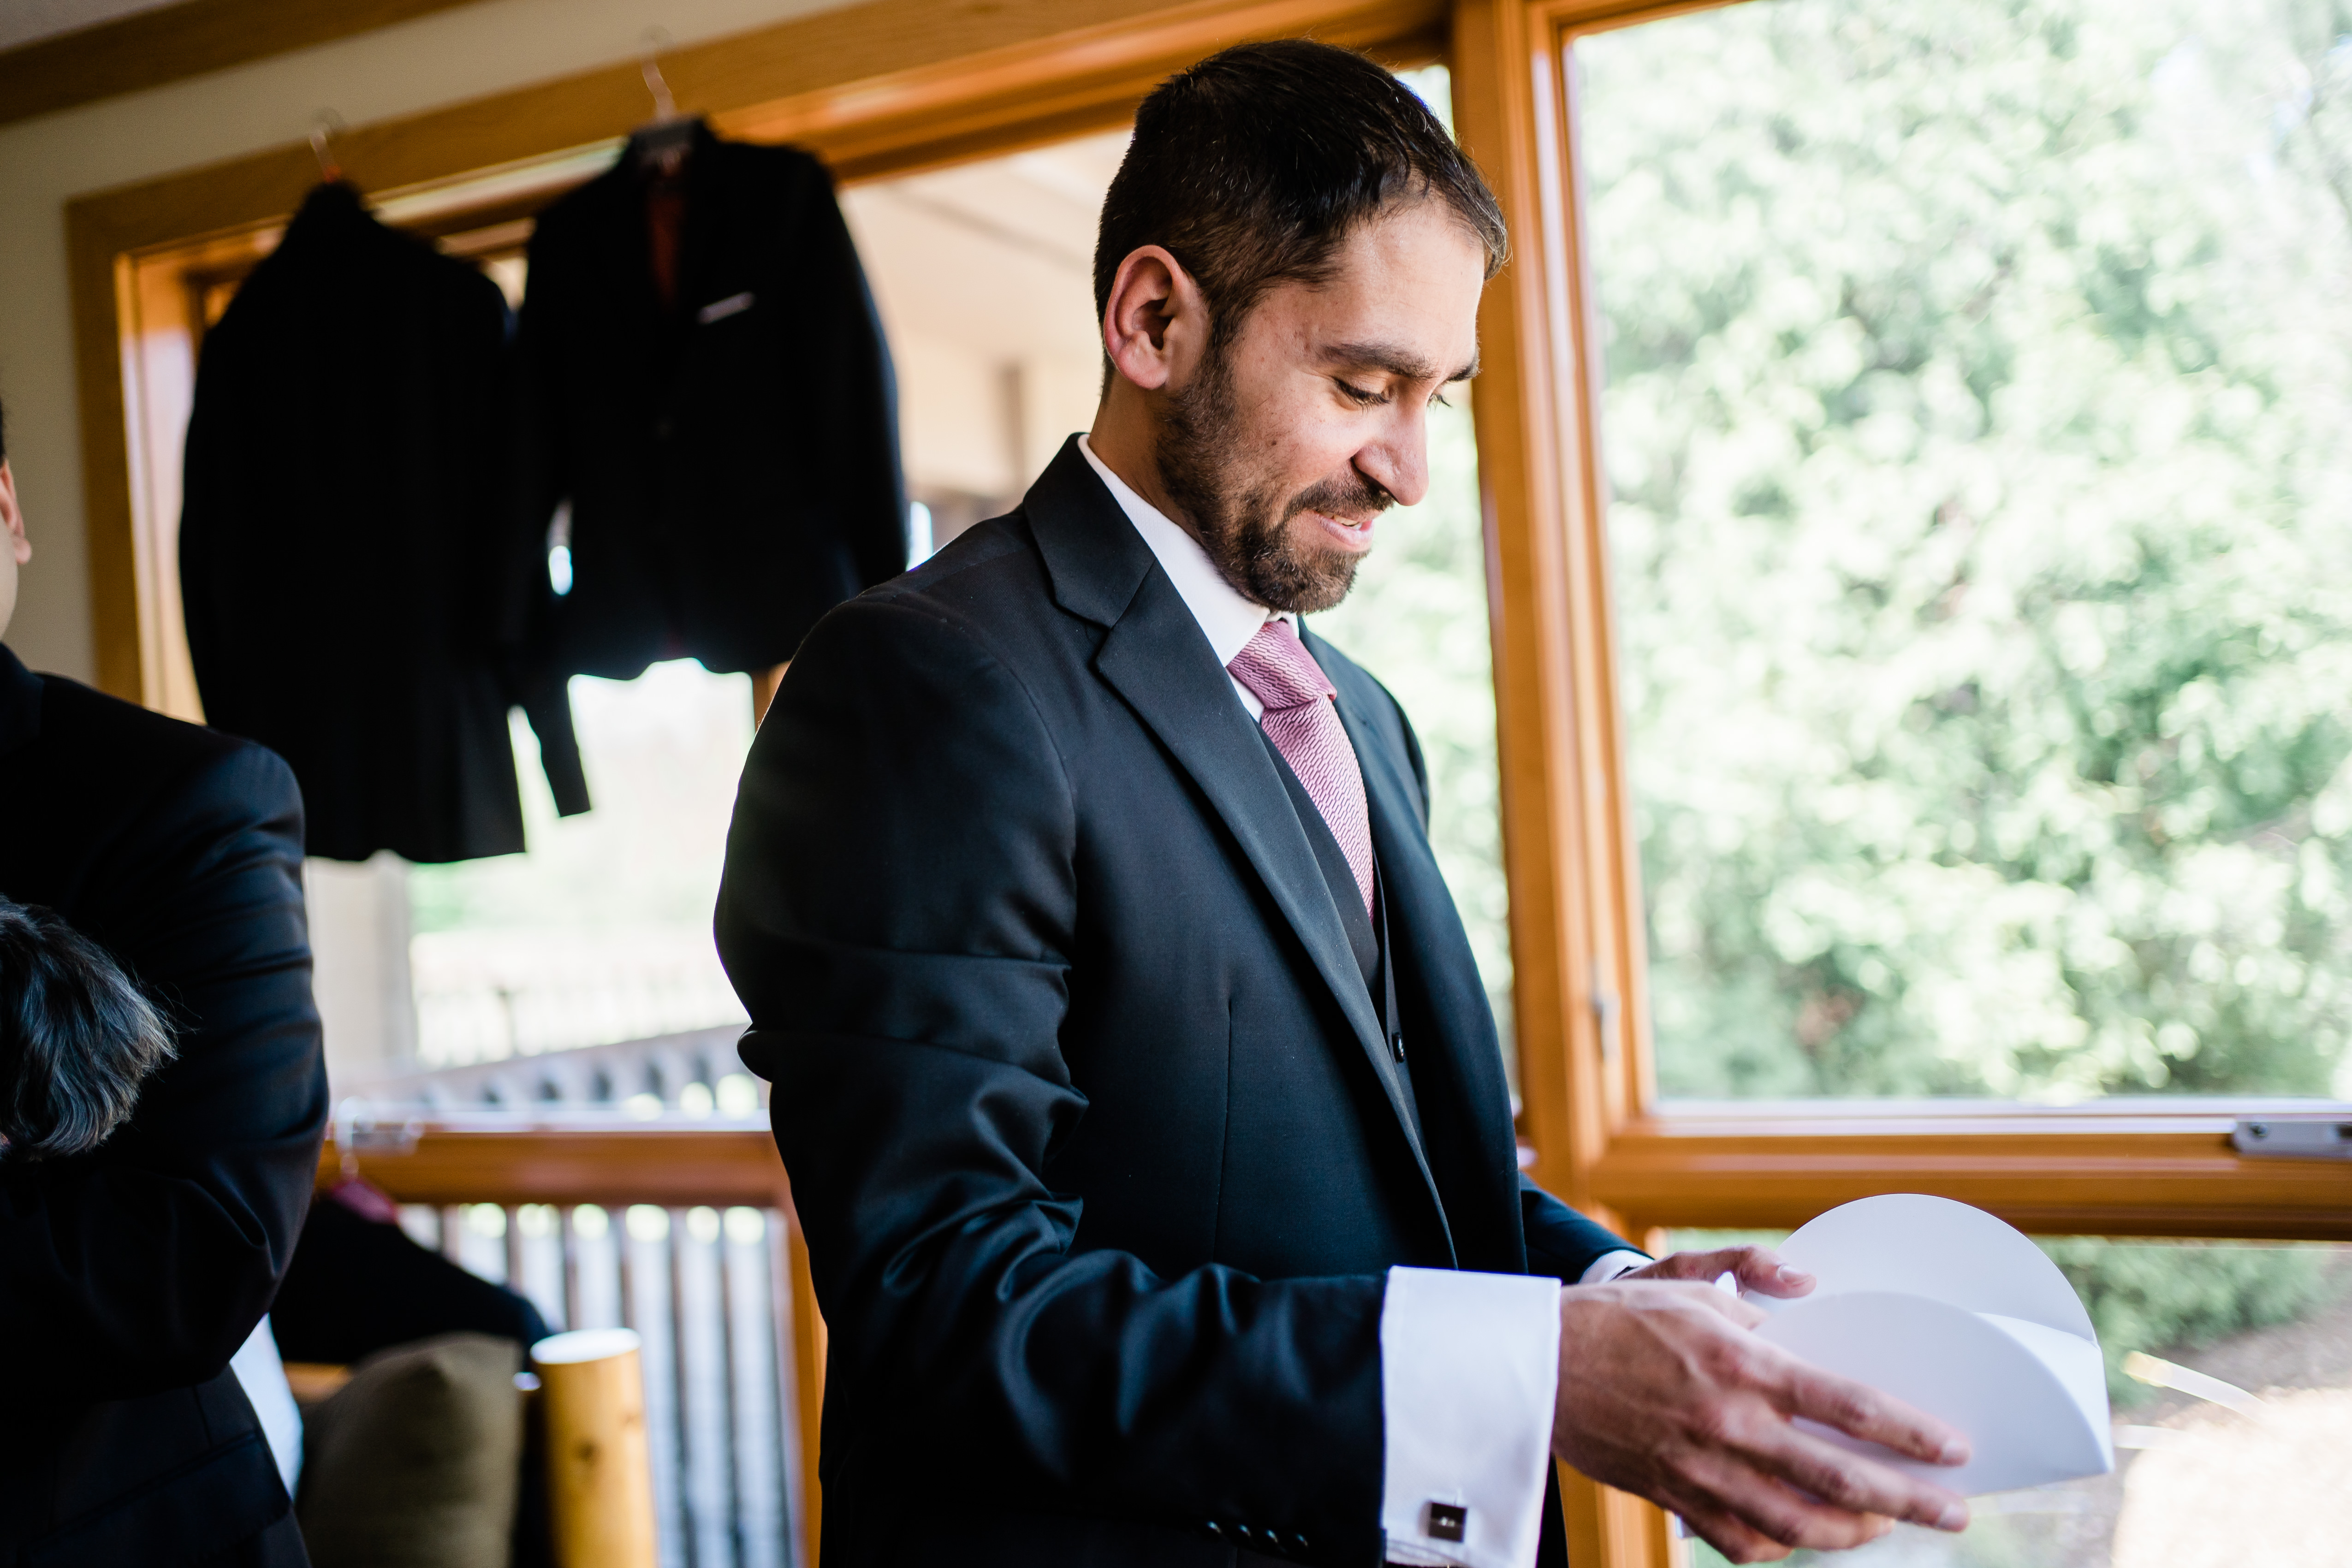 groom opening a gift from his bride before the ceremony in his suite